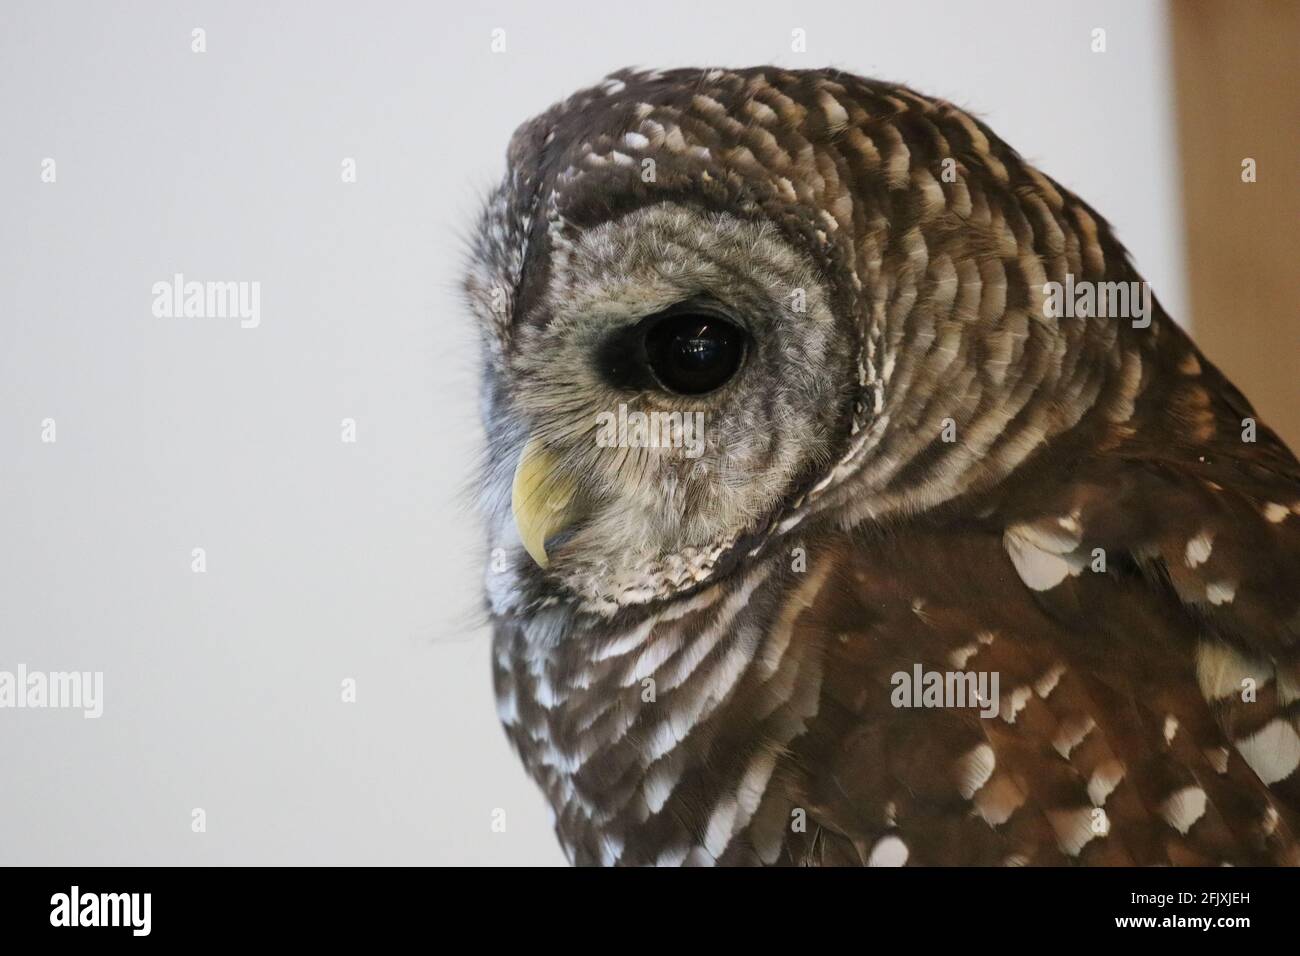 Barred owl looking to the side close-up of head Stock Photo